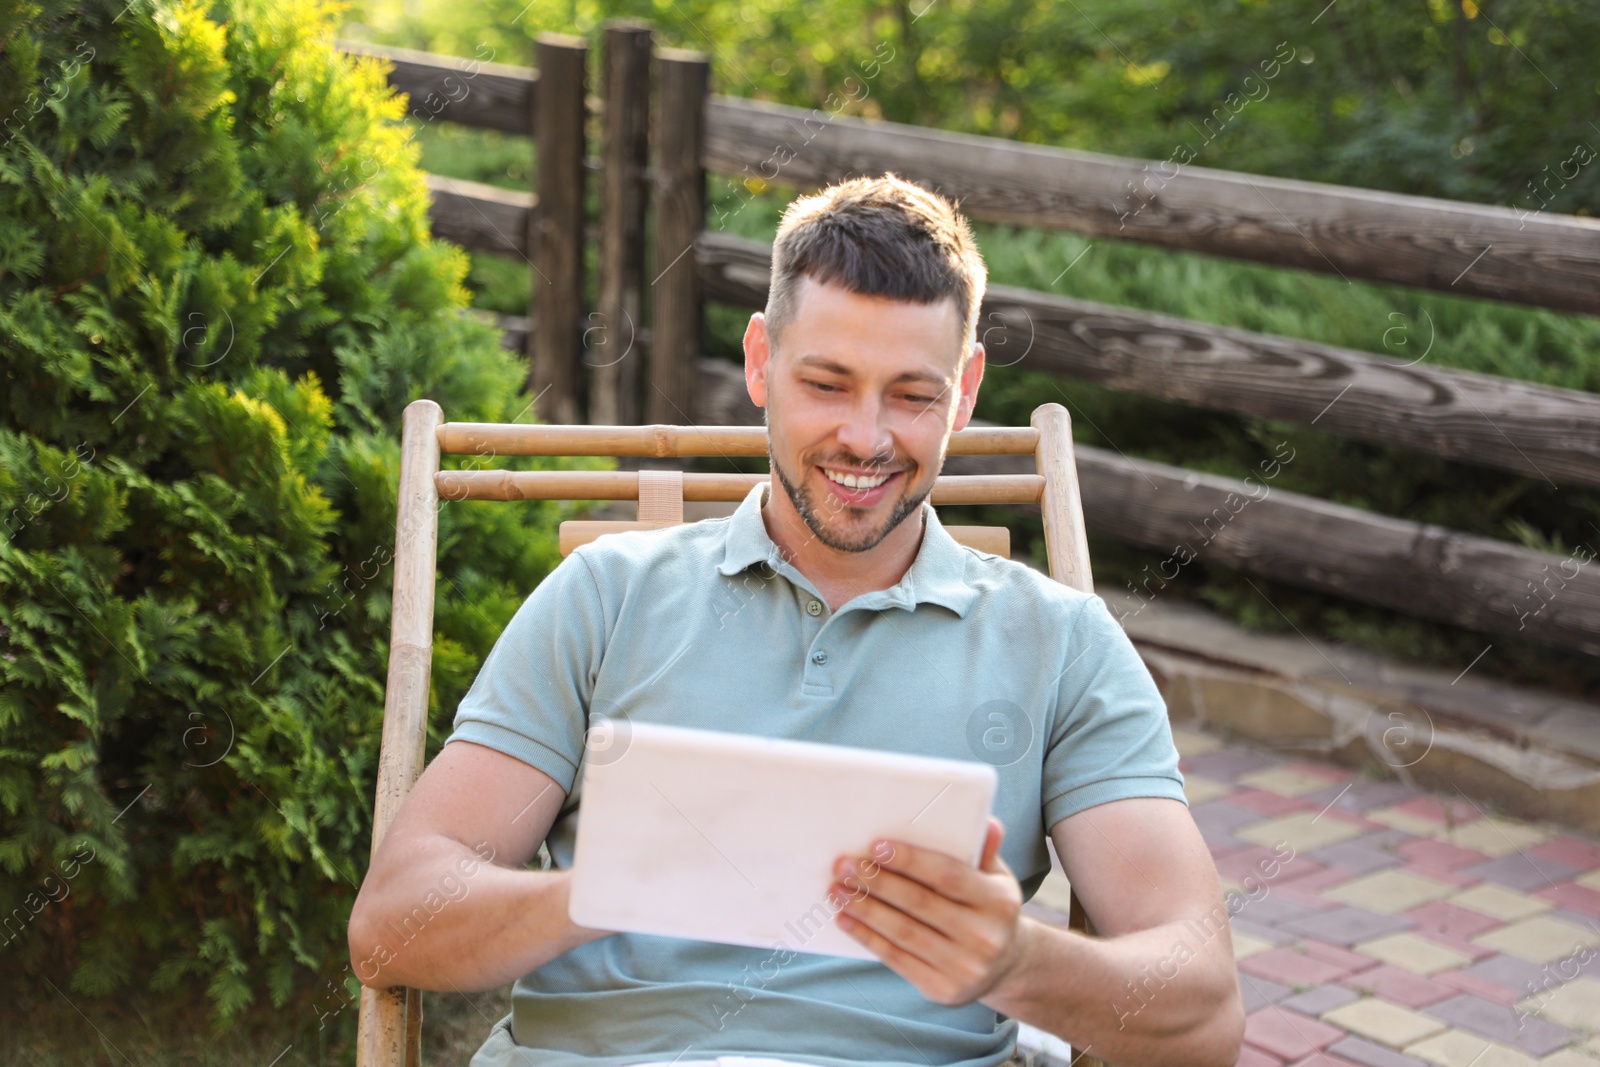 Image of Happy man using tablet in deck chair outdoors